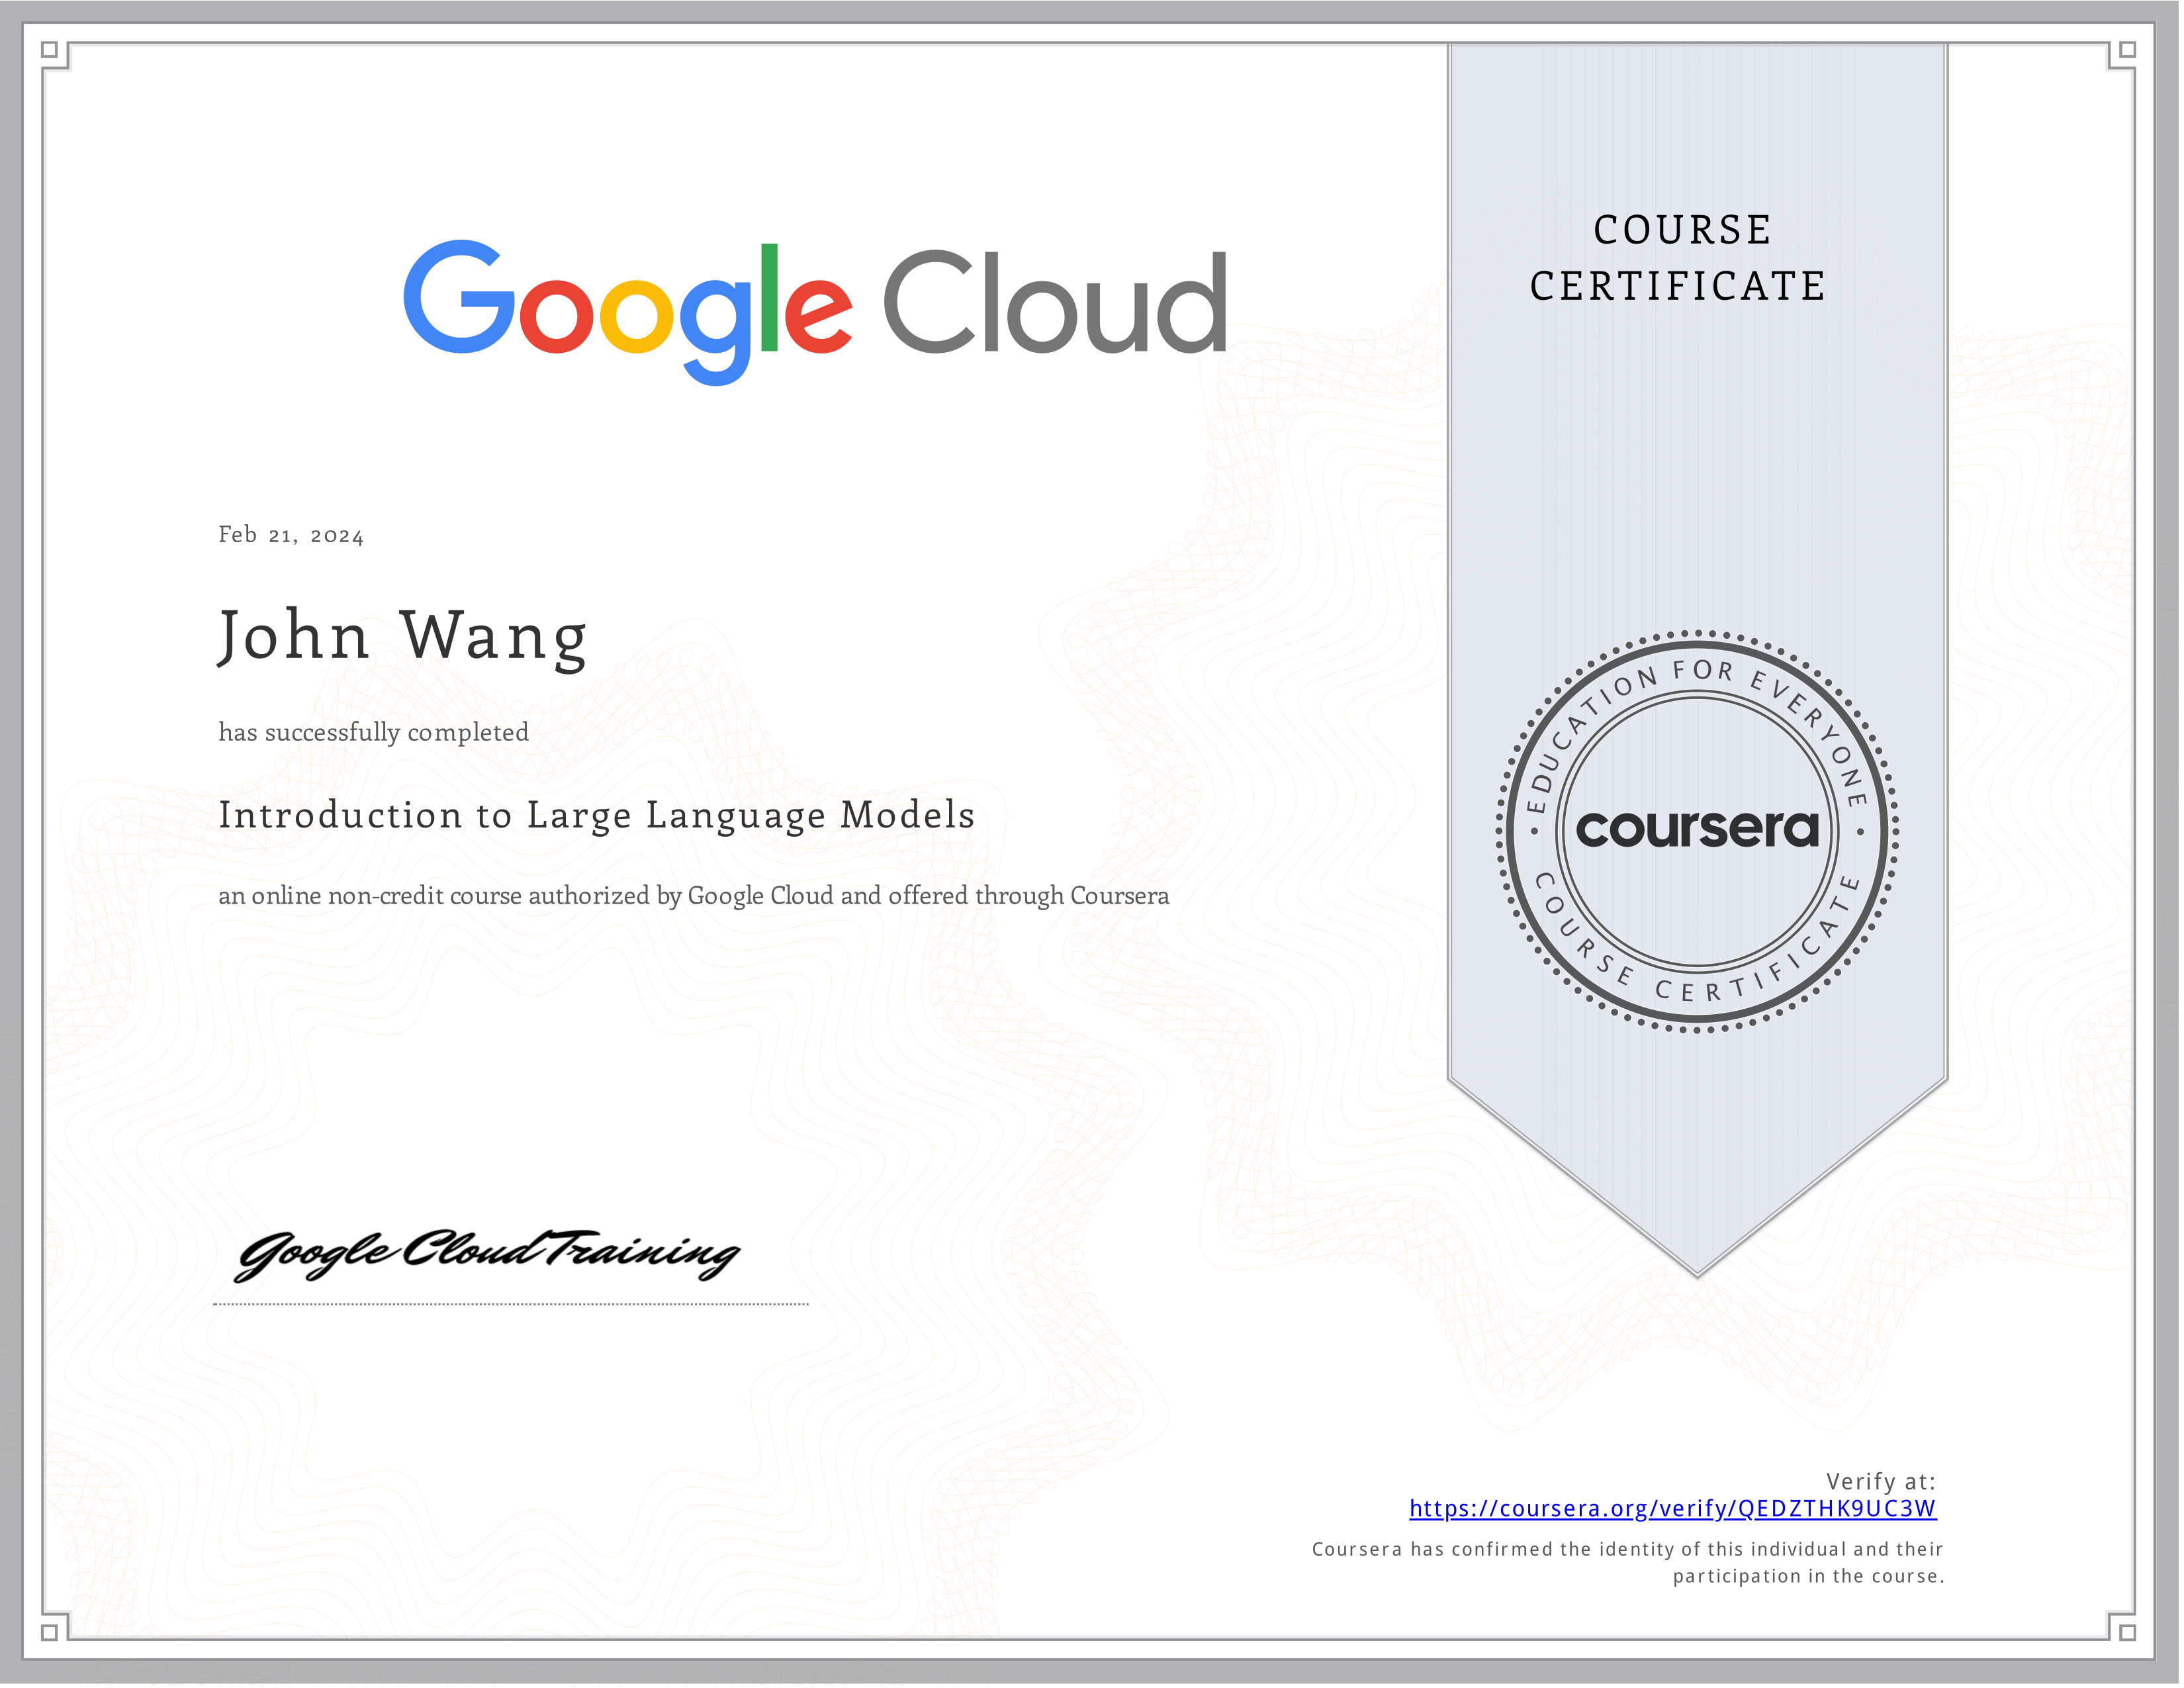 John's Introduction to Large Language Models from Google Cloud